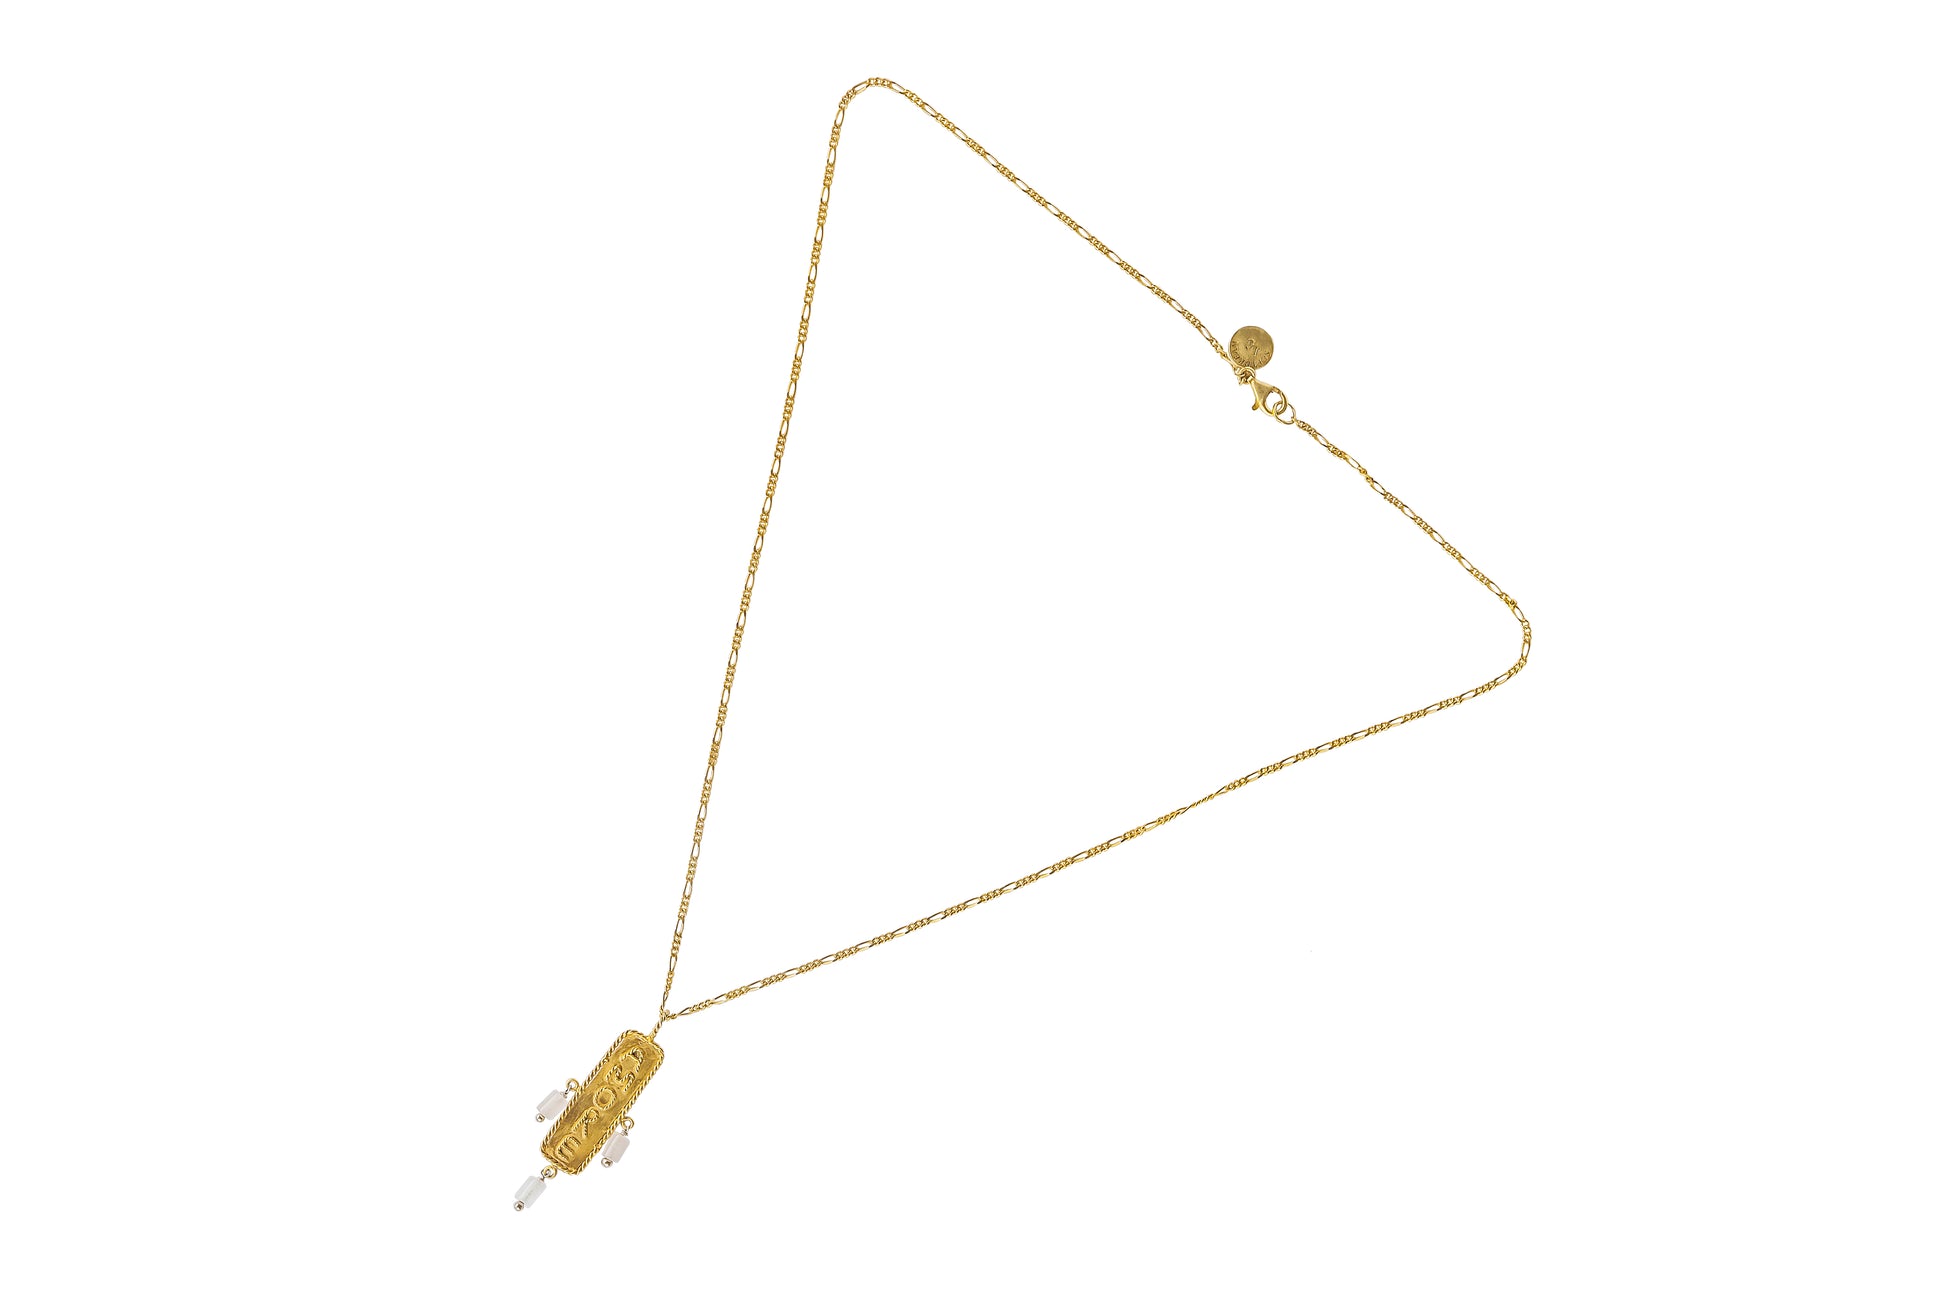 Amore gold Chain Necklace